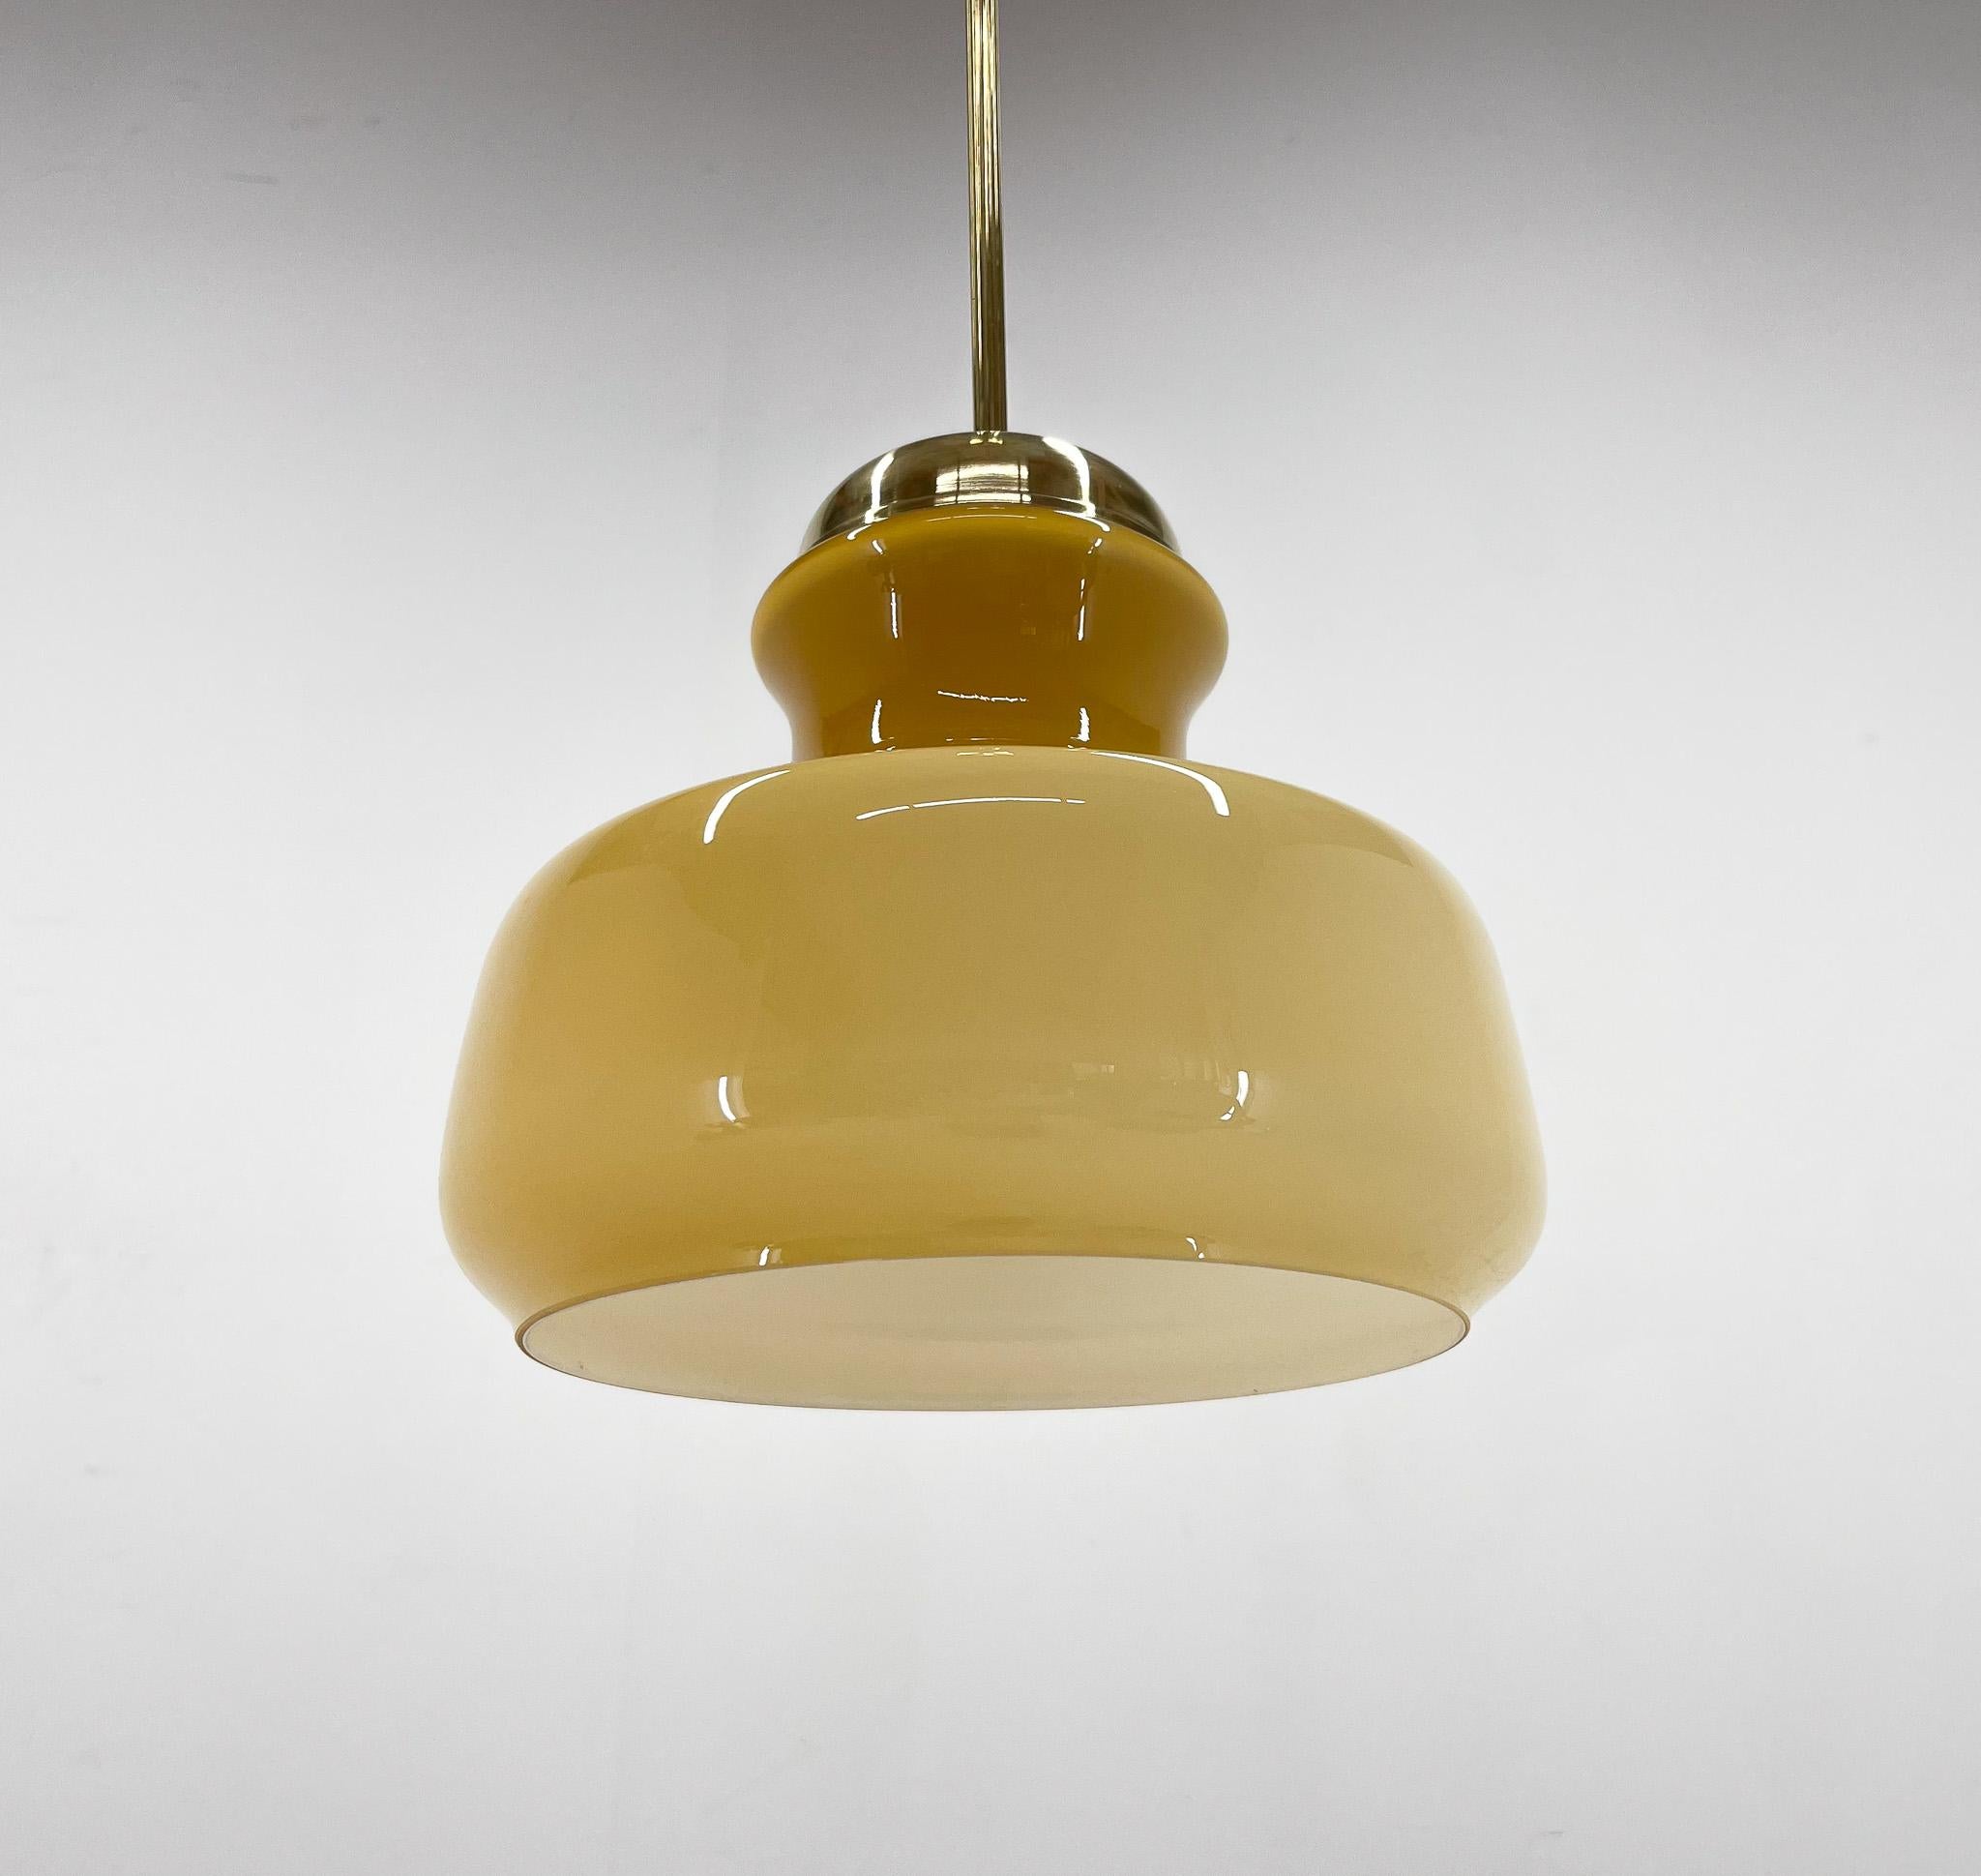 Vintage pendant light produced in former Czechoslovakia in the 1970's. Made of glass and brass. 
Restored, rewired. Bulb: 1 x E25-E27. US wiring compatible.